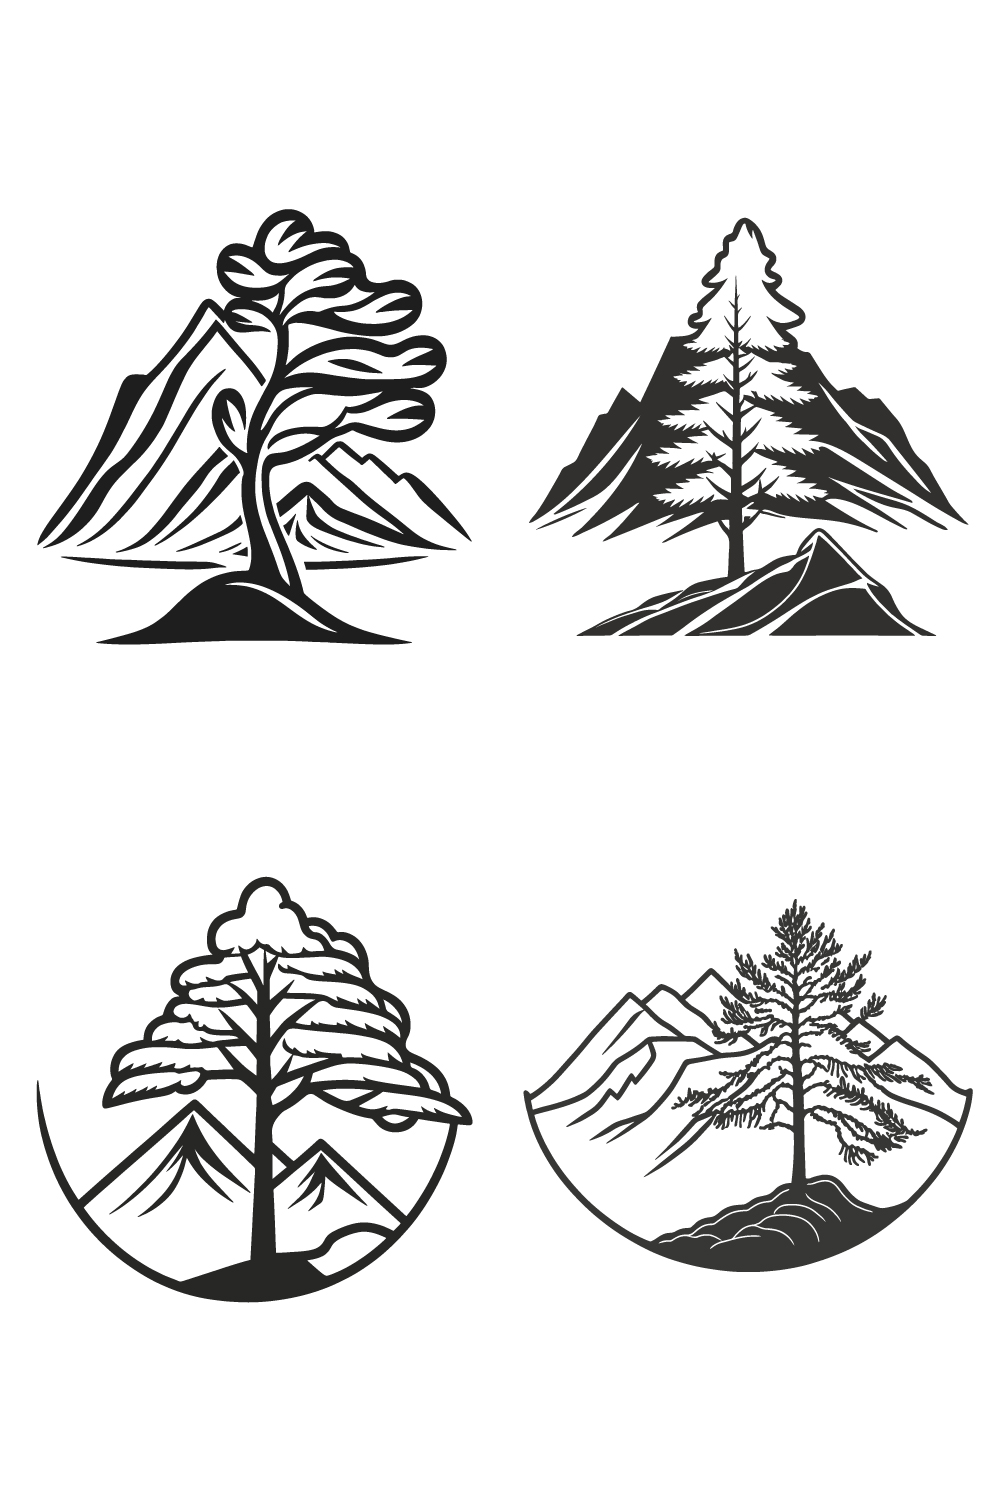 How to Draw Mountains in 5 Easy Steps - The Bluprint Blog | Craftsy |  www.craftsy.com